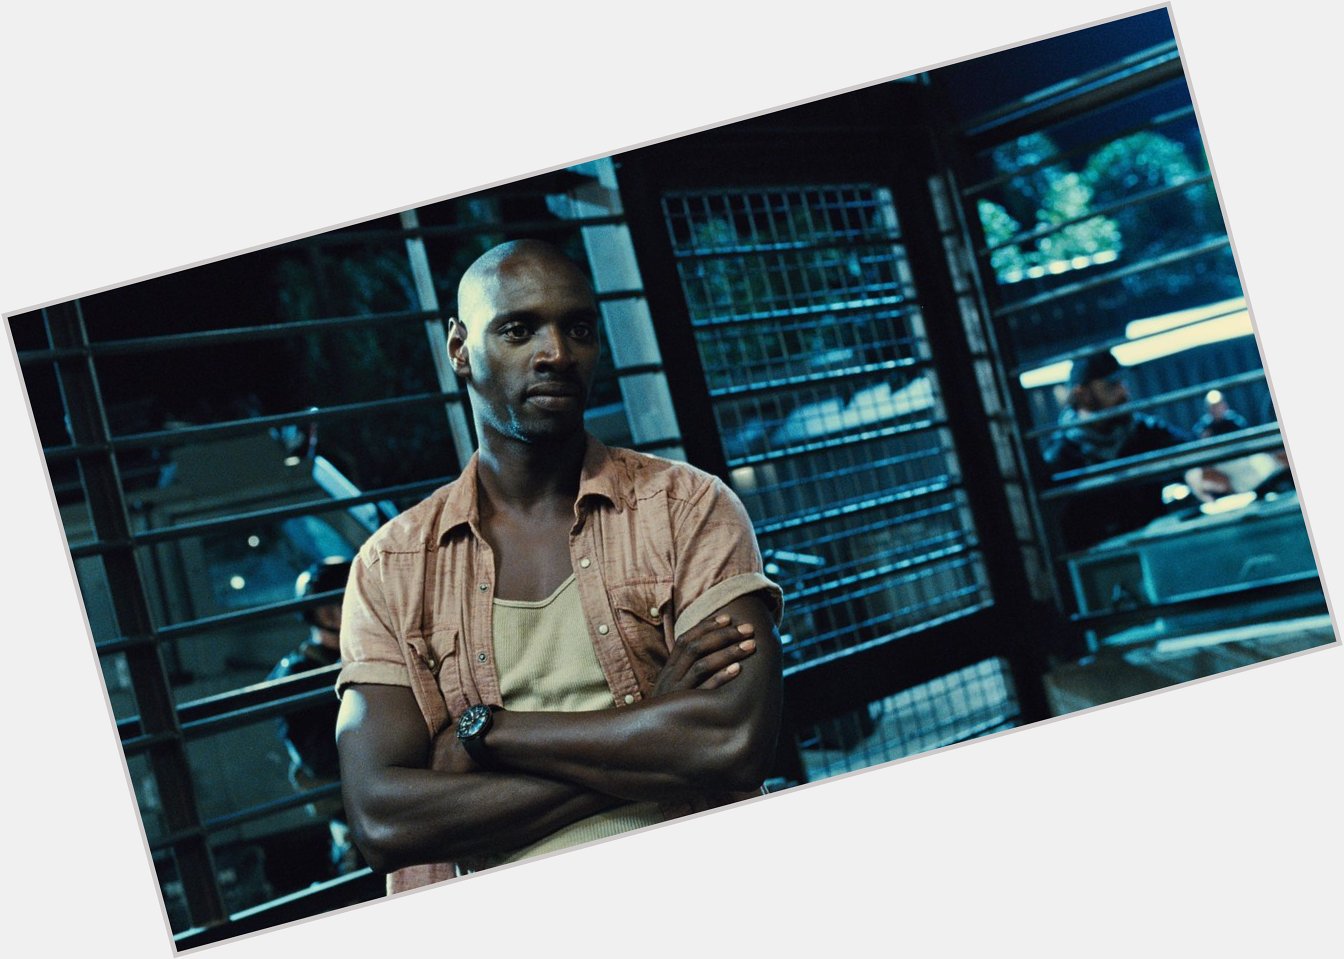 We would like to wish Omar Sy a happy birthday. He is 44 years old today. He played Barry in Jurassic World. 